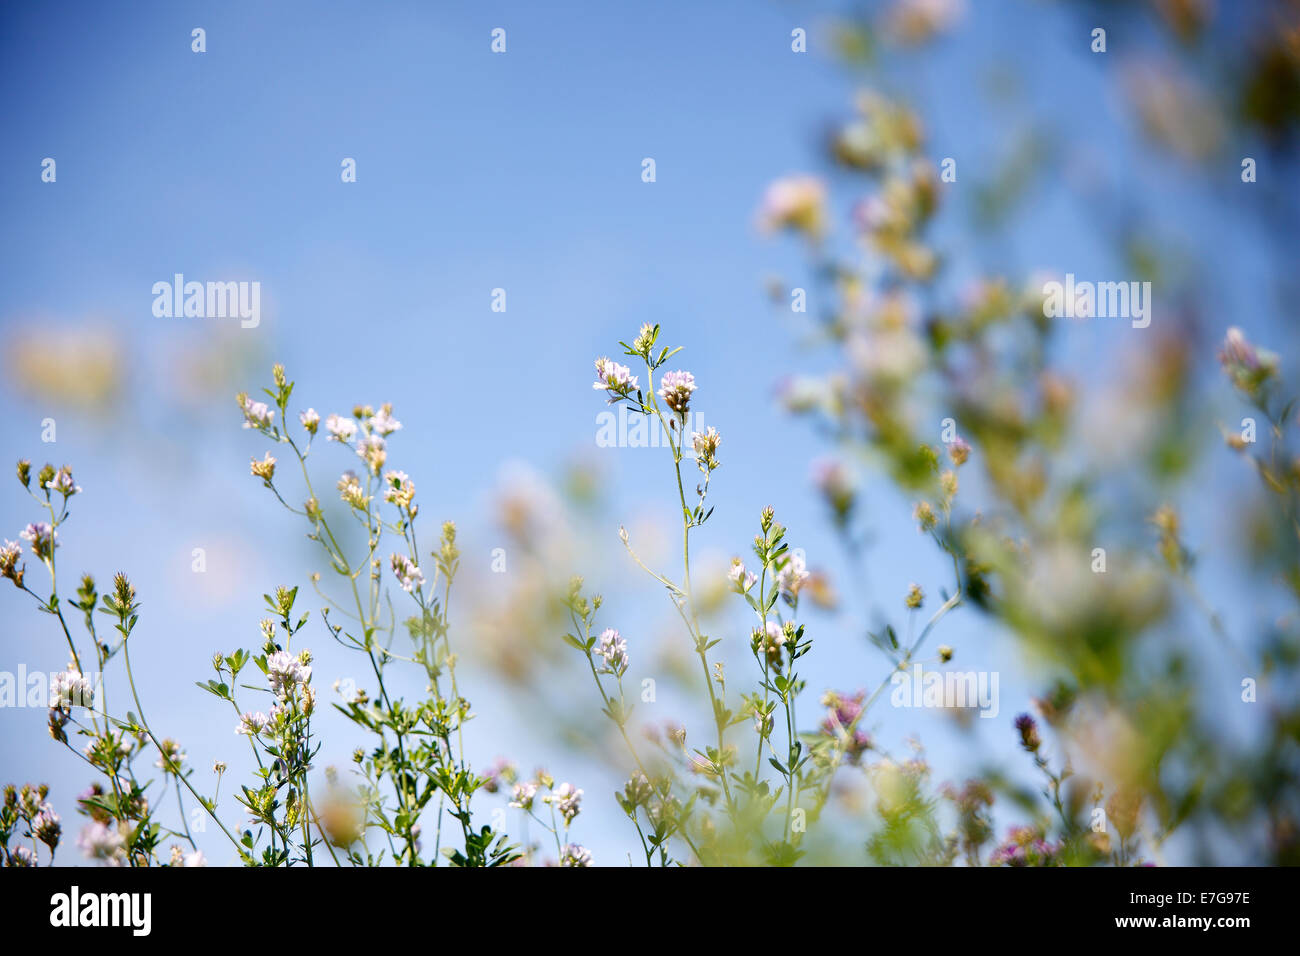 Awakening of plants and flowers in the nature in spring Stock Photo